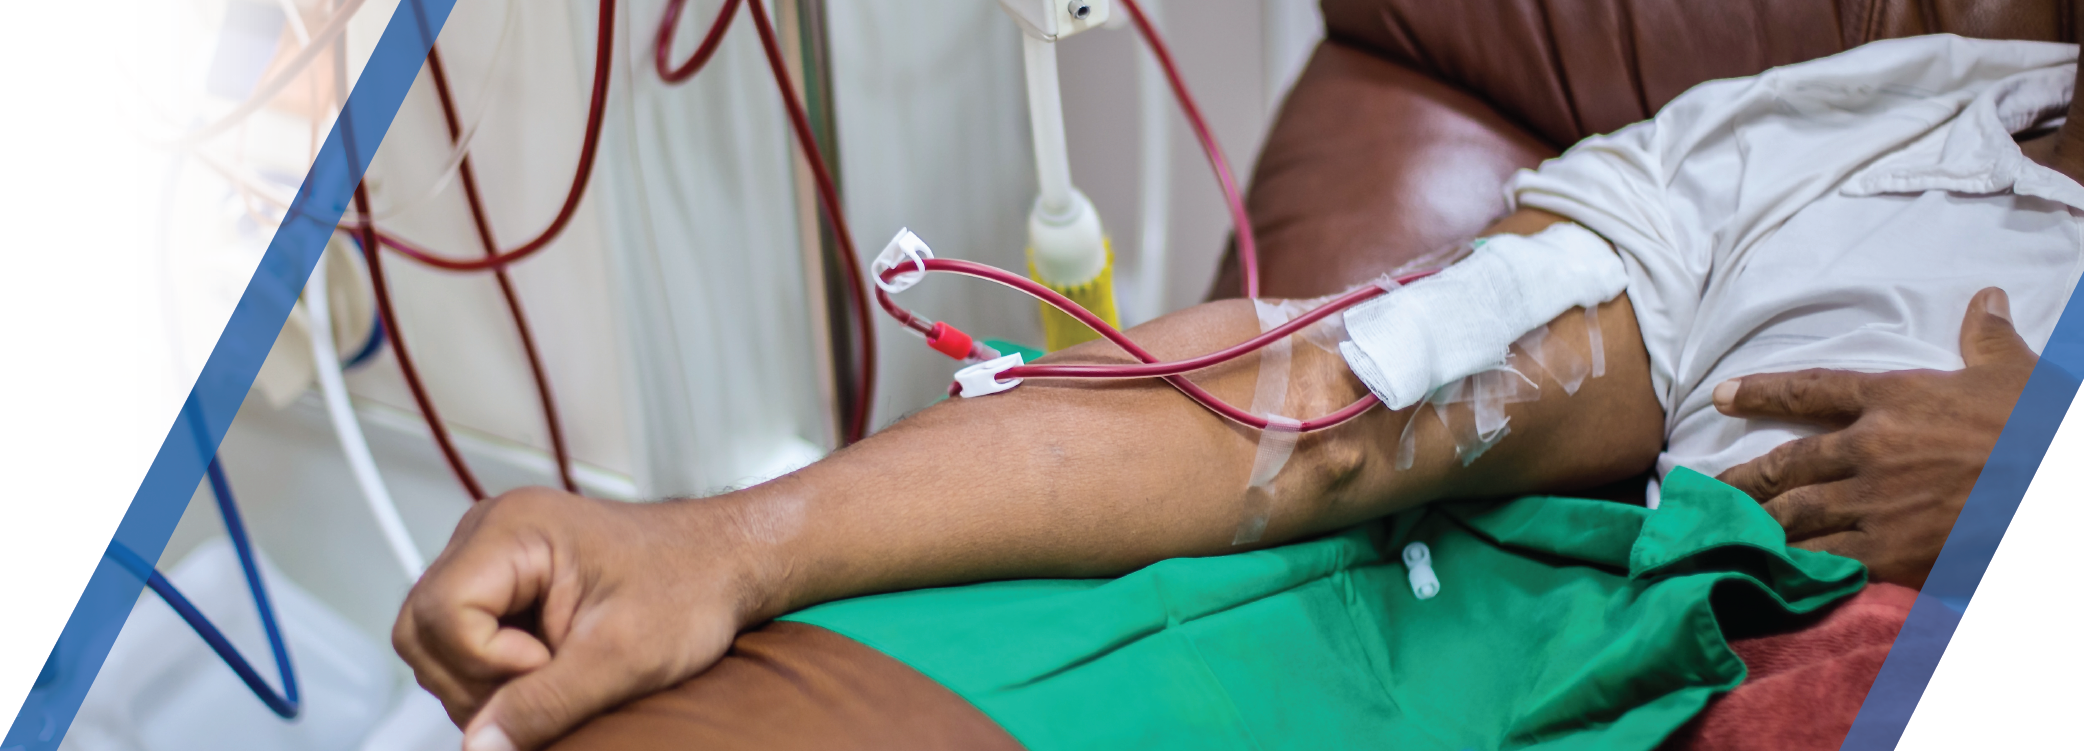 CMS Updates Guidance and Survey Process for Home Dialysis Services in Nursing Homes